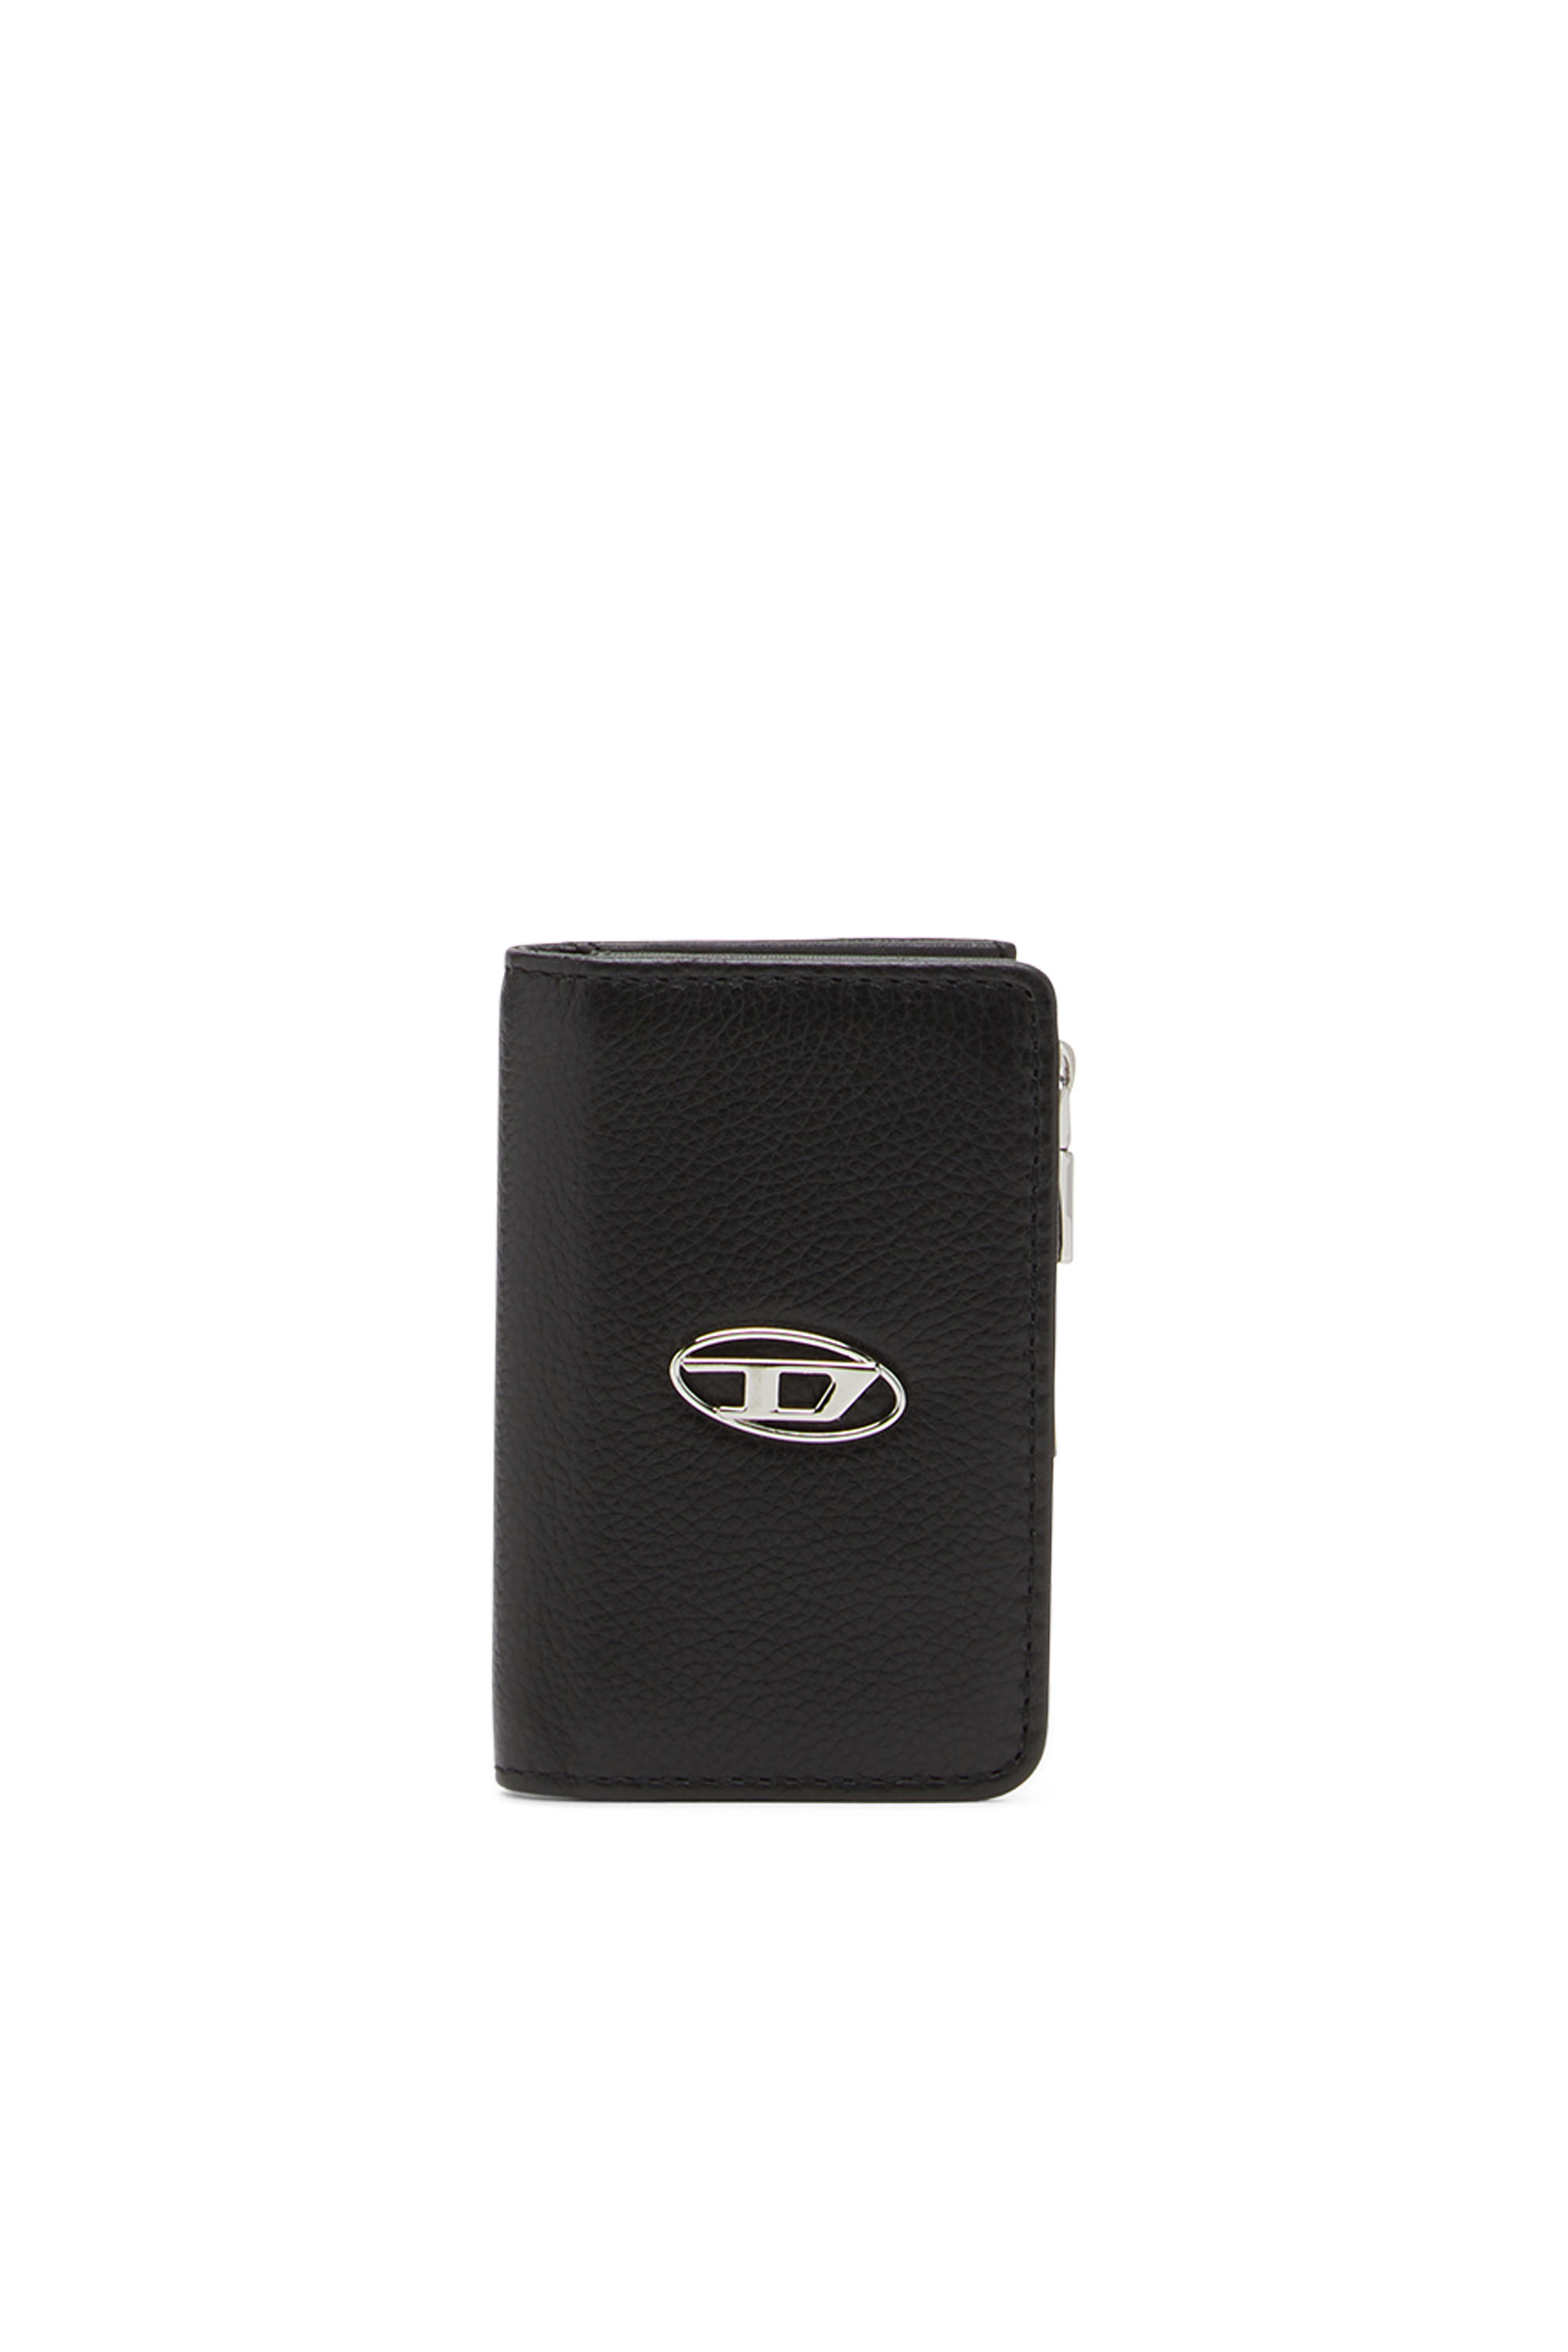 Diesel - Key case in grained leather - Bijoux and Gadgets - Man - Black